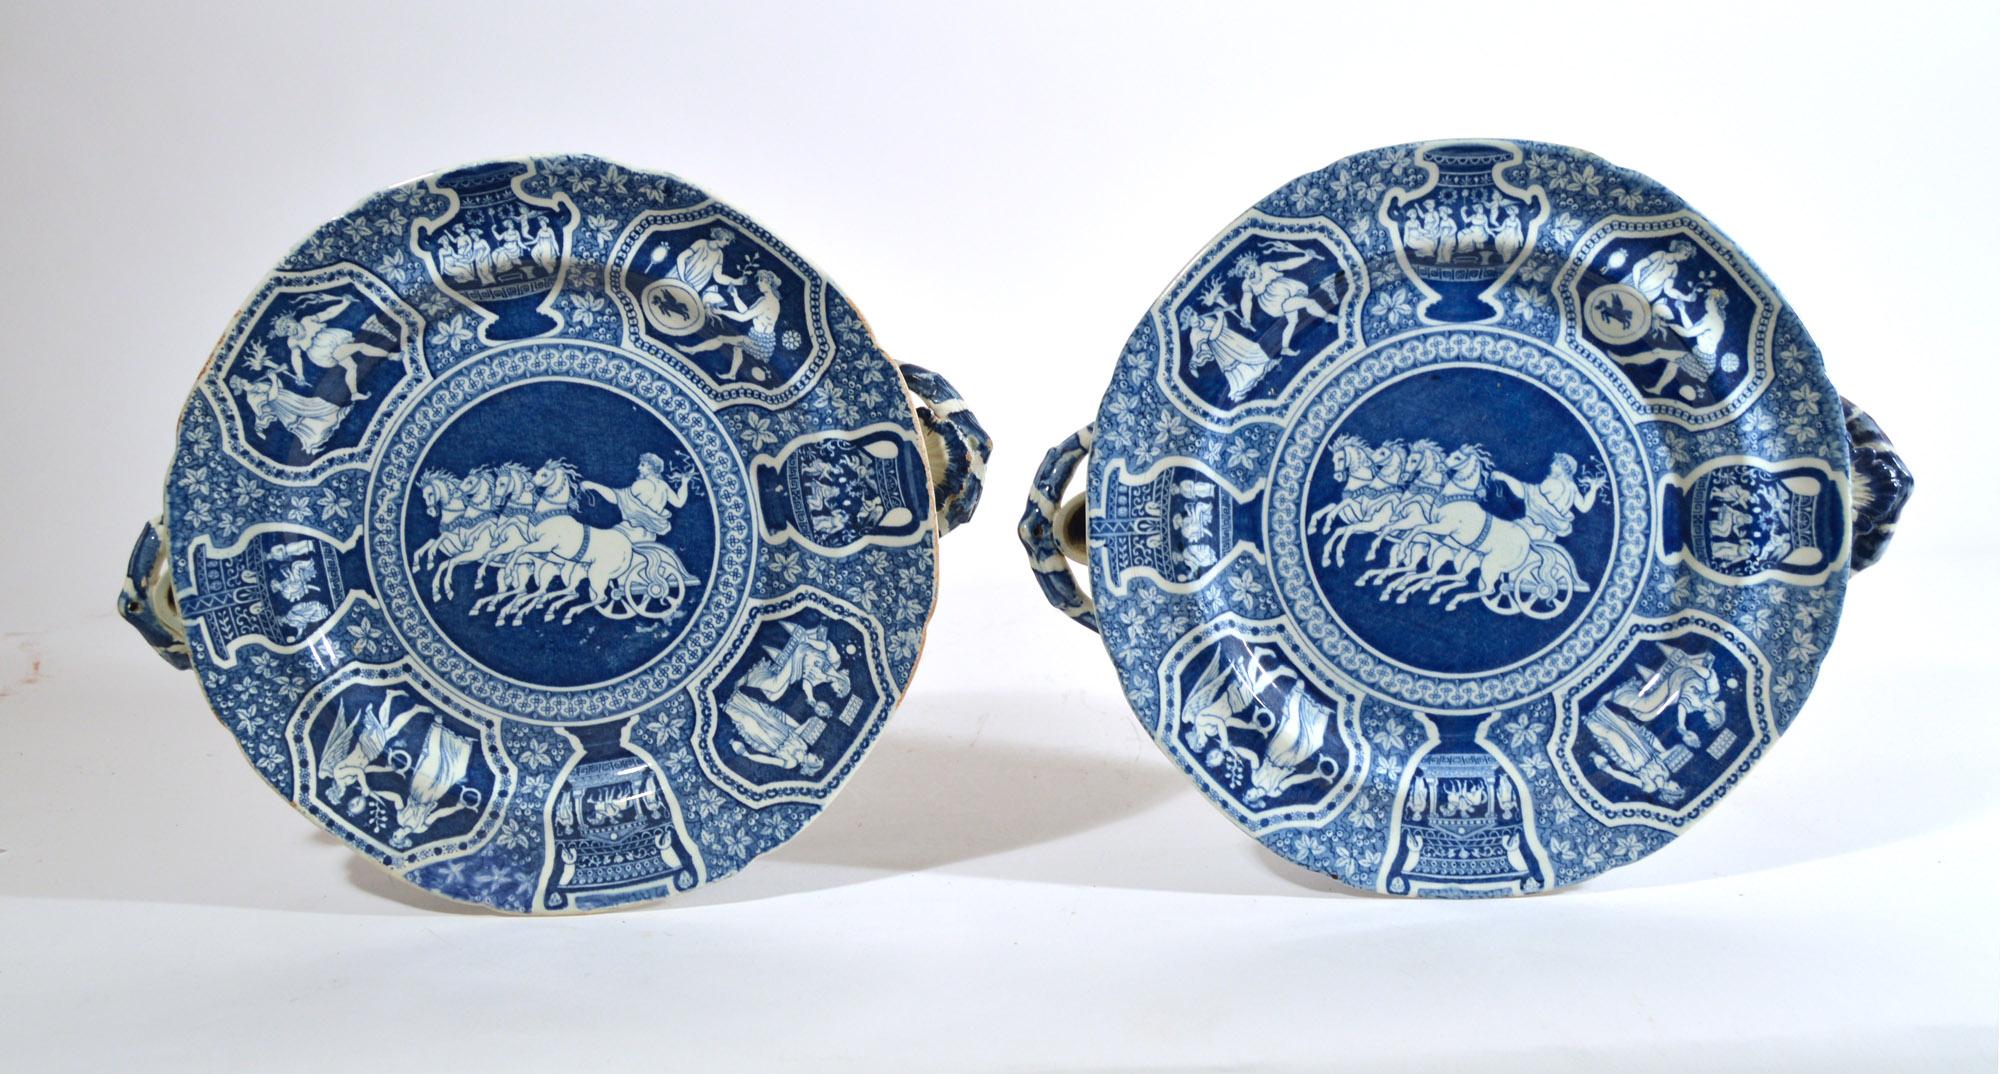 Spode Neo-classical Greek pattern blue printed hot water dishes,
Zeus in his Chariot,
A pair,
Early 19th century
(We have five in all-two pairs and a single)

The Spode pottery underglaze blue central pattern shows Zeus (Jupiter) riding to